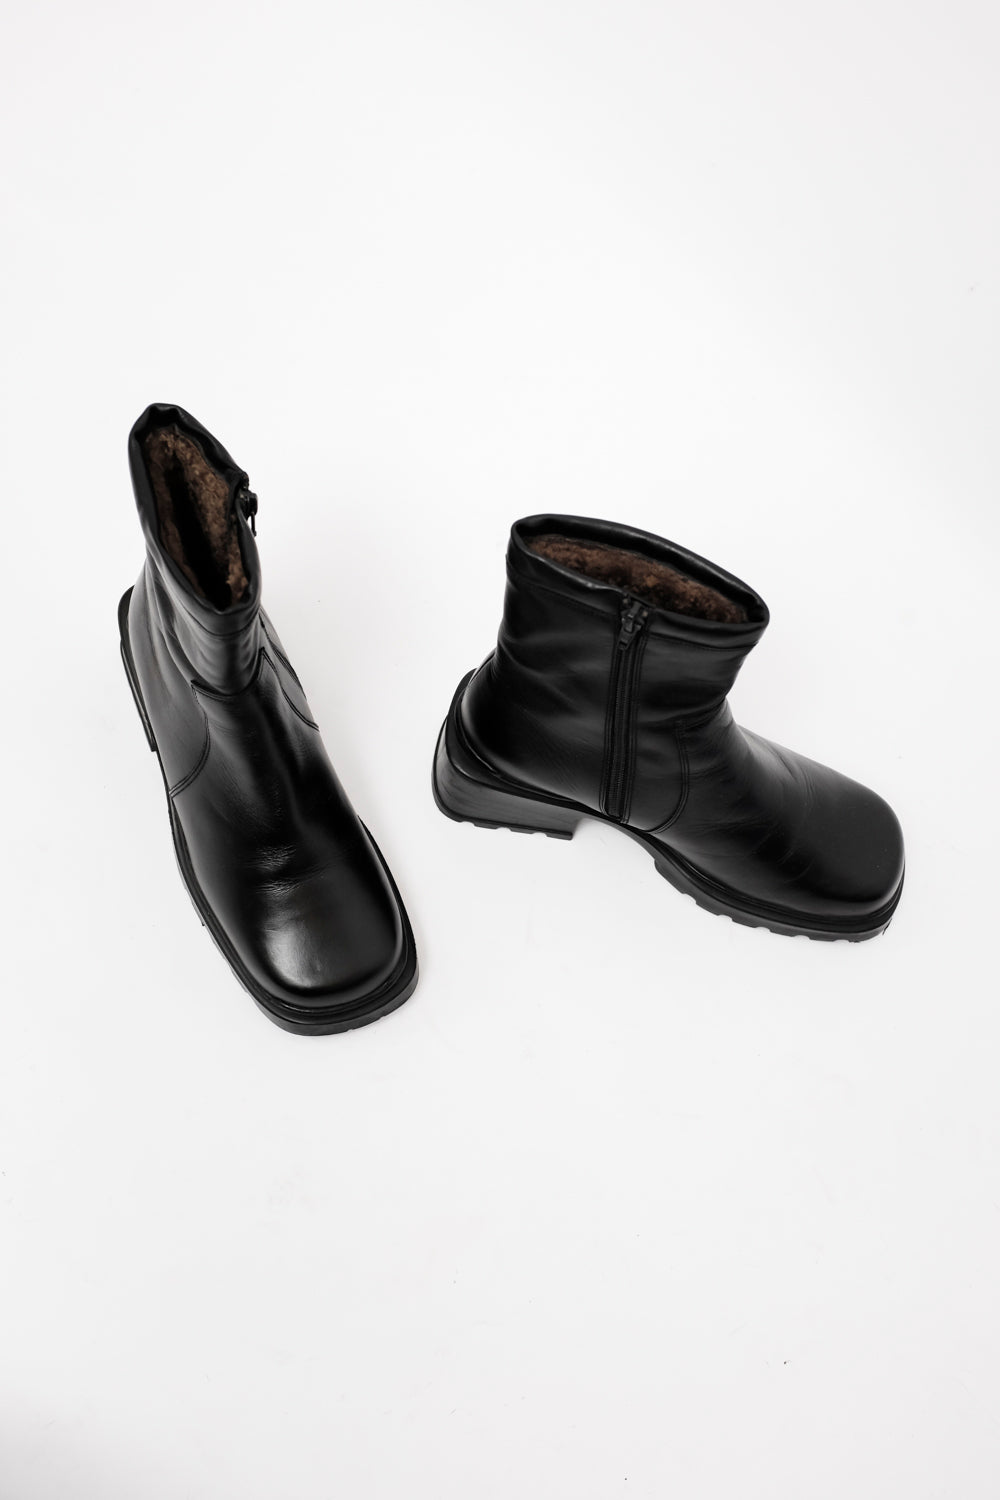 0021_WARM DERBY LEATHER BOOTS 38